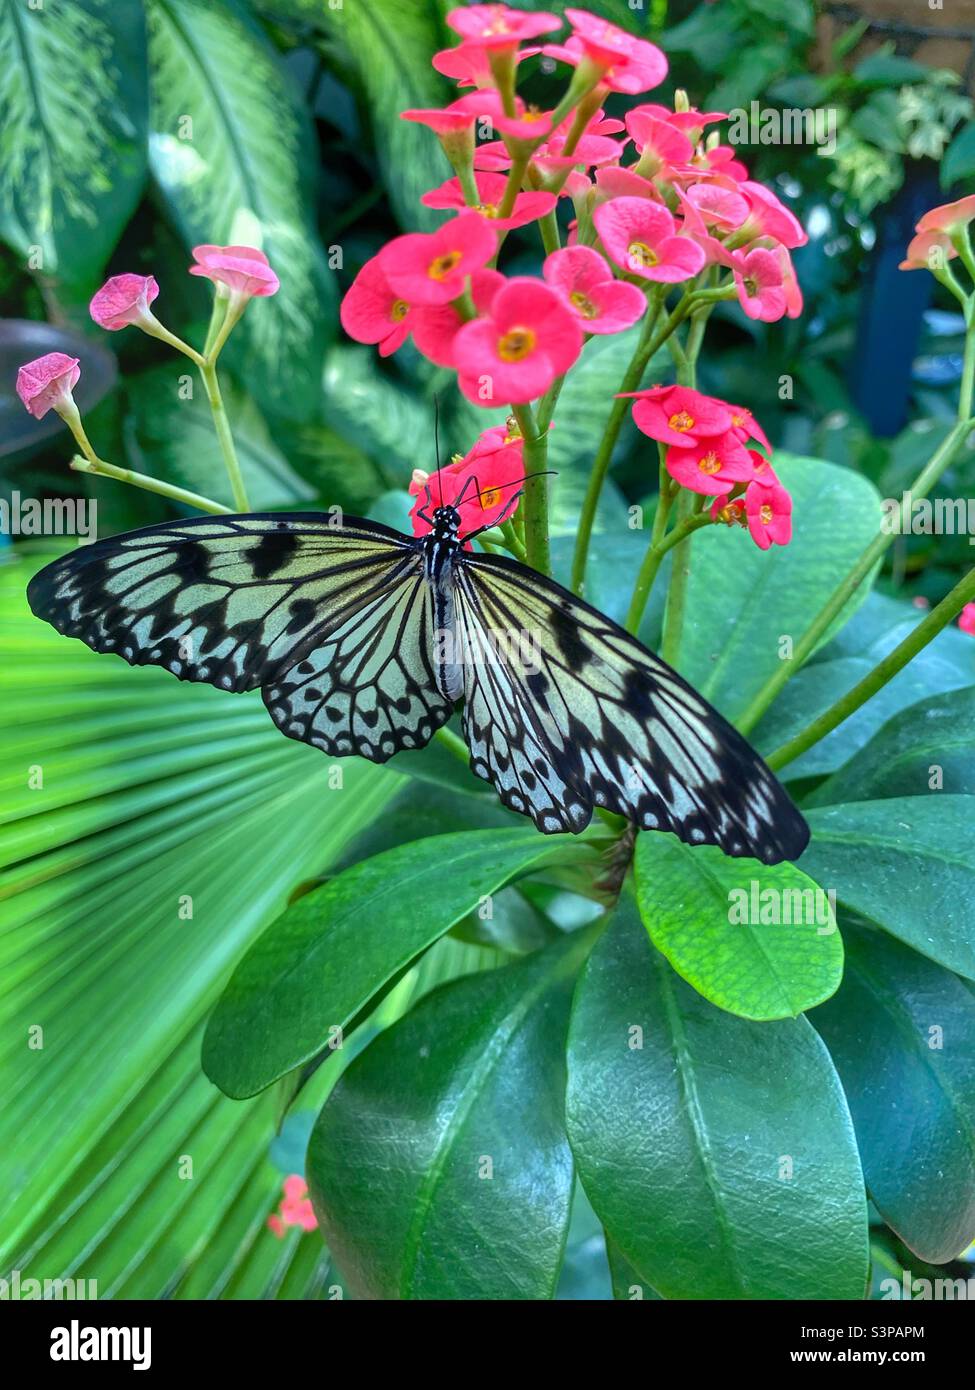 Black and yellow butterfly sitting on a pink flower in the garden Stock Photo